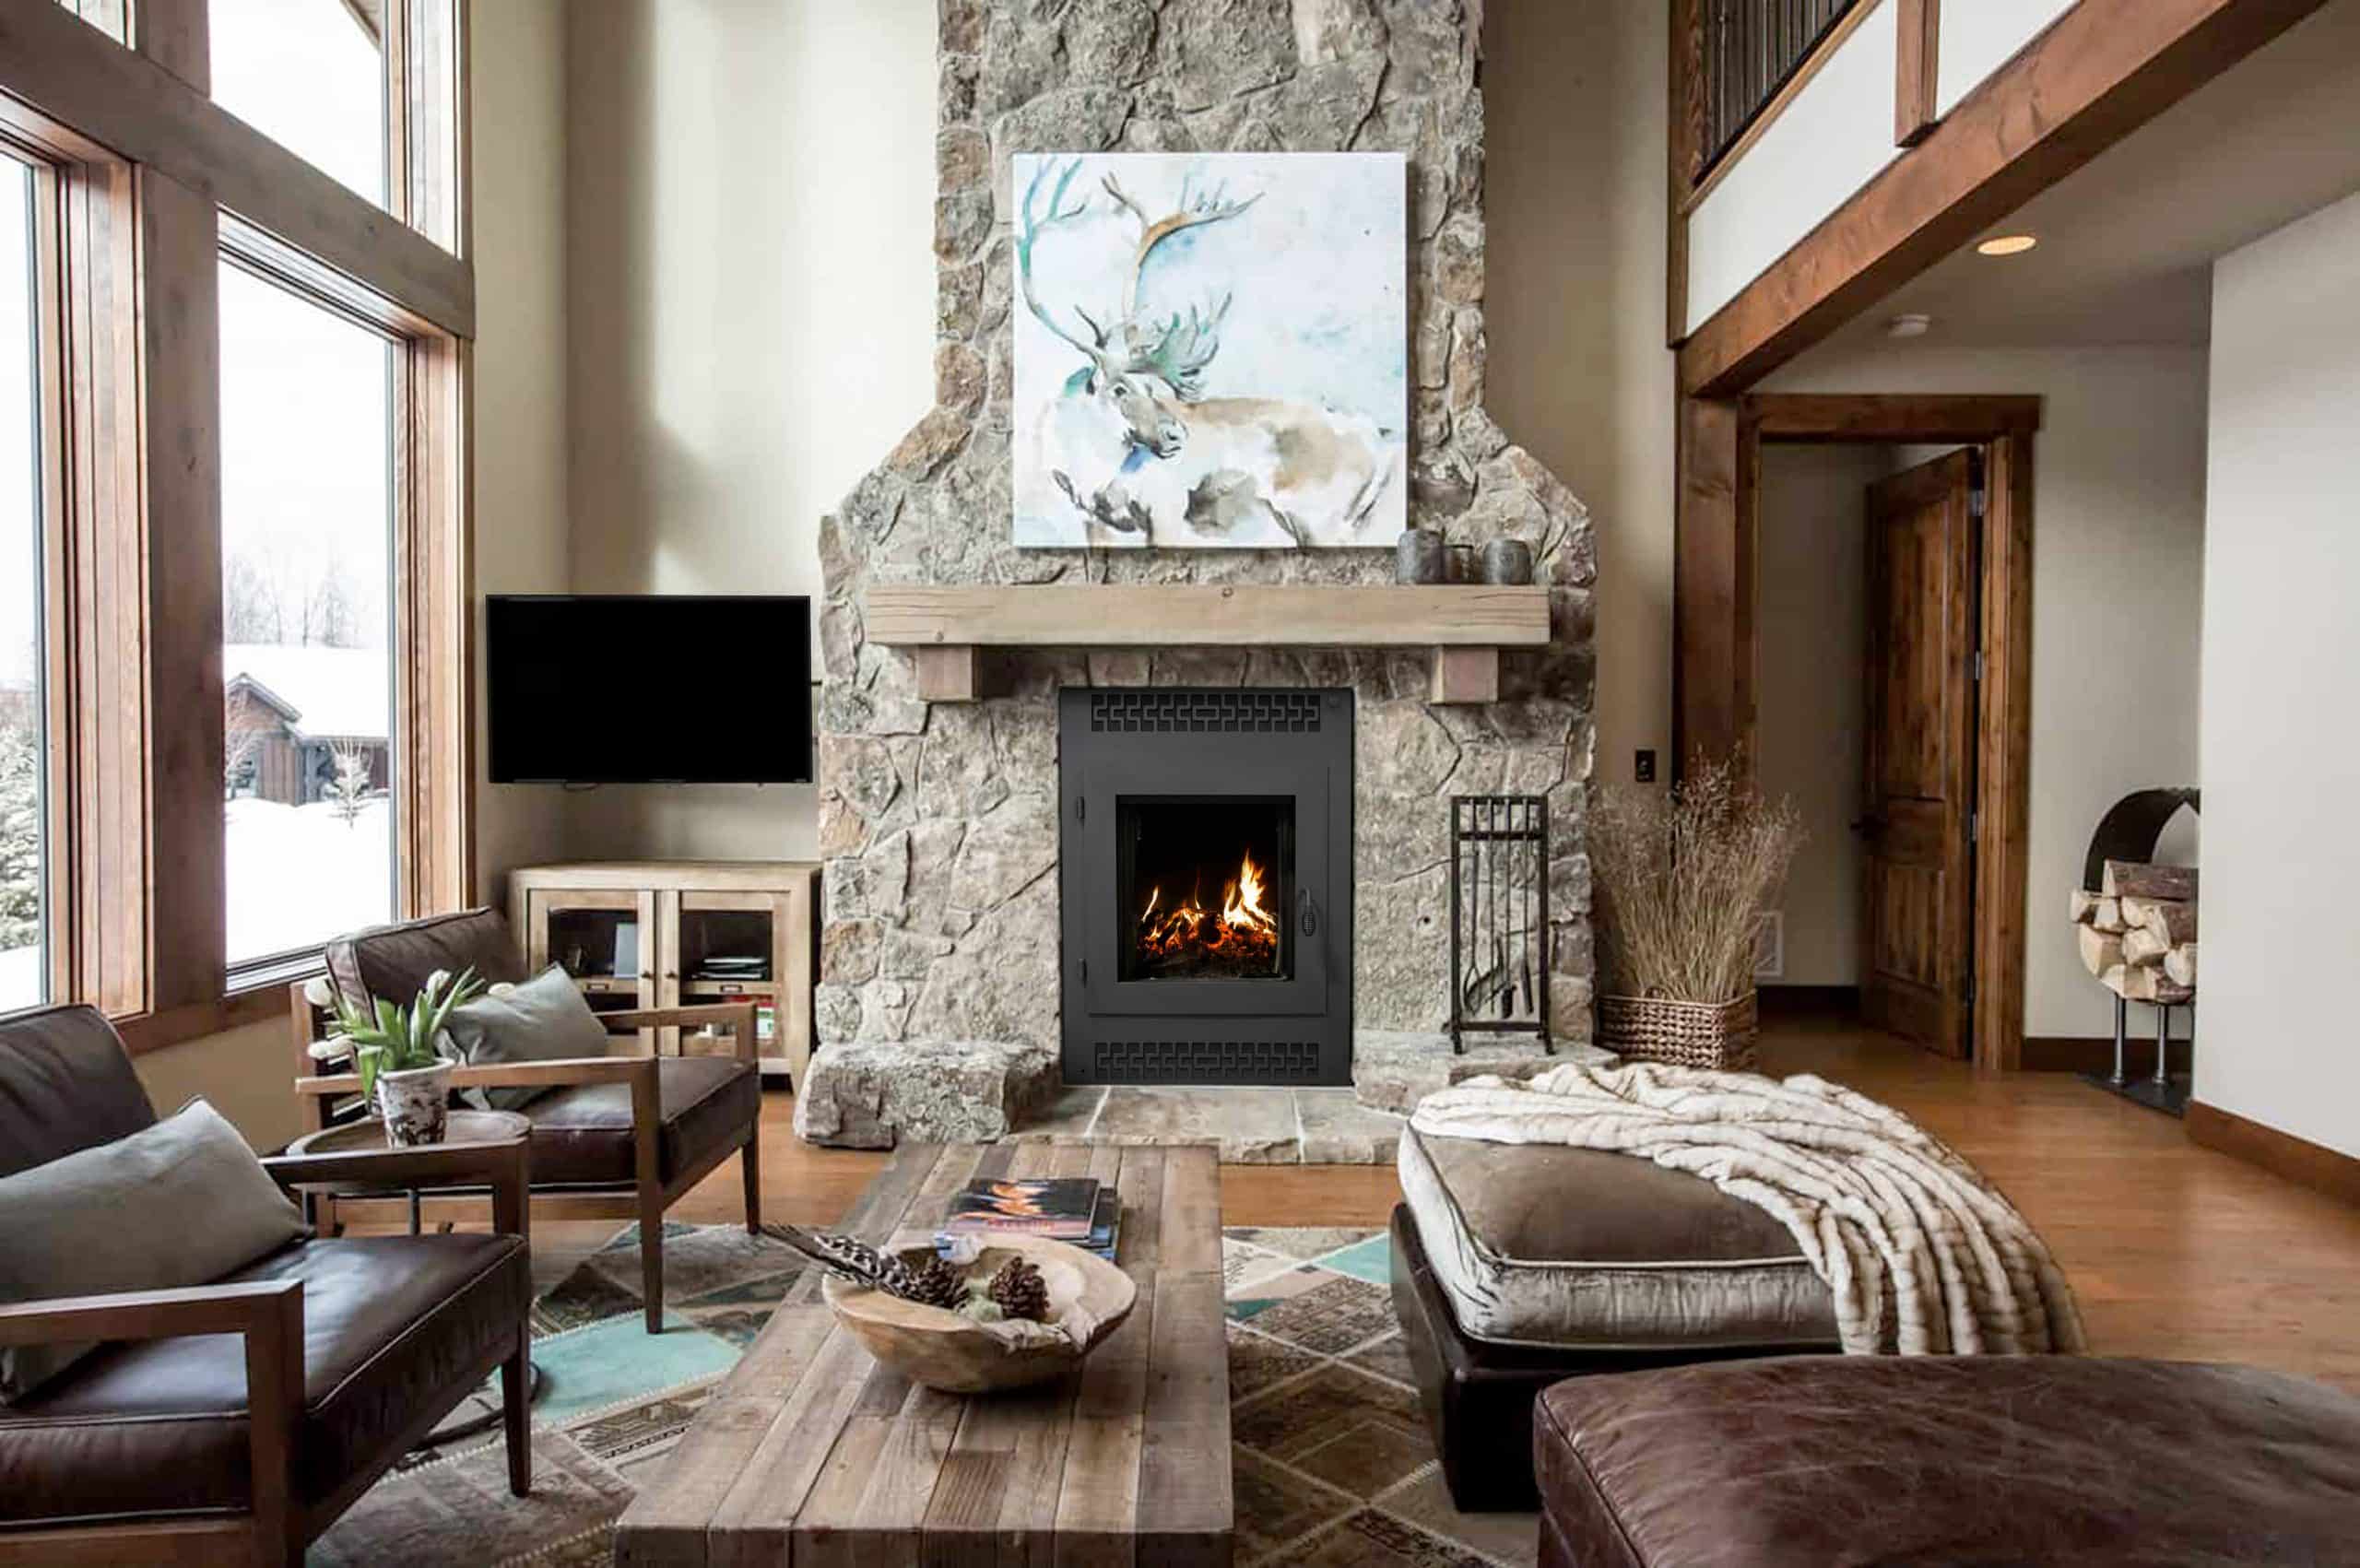 Small wood-burning fireplace in a living room with a wood coffee table